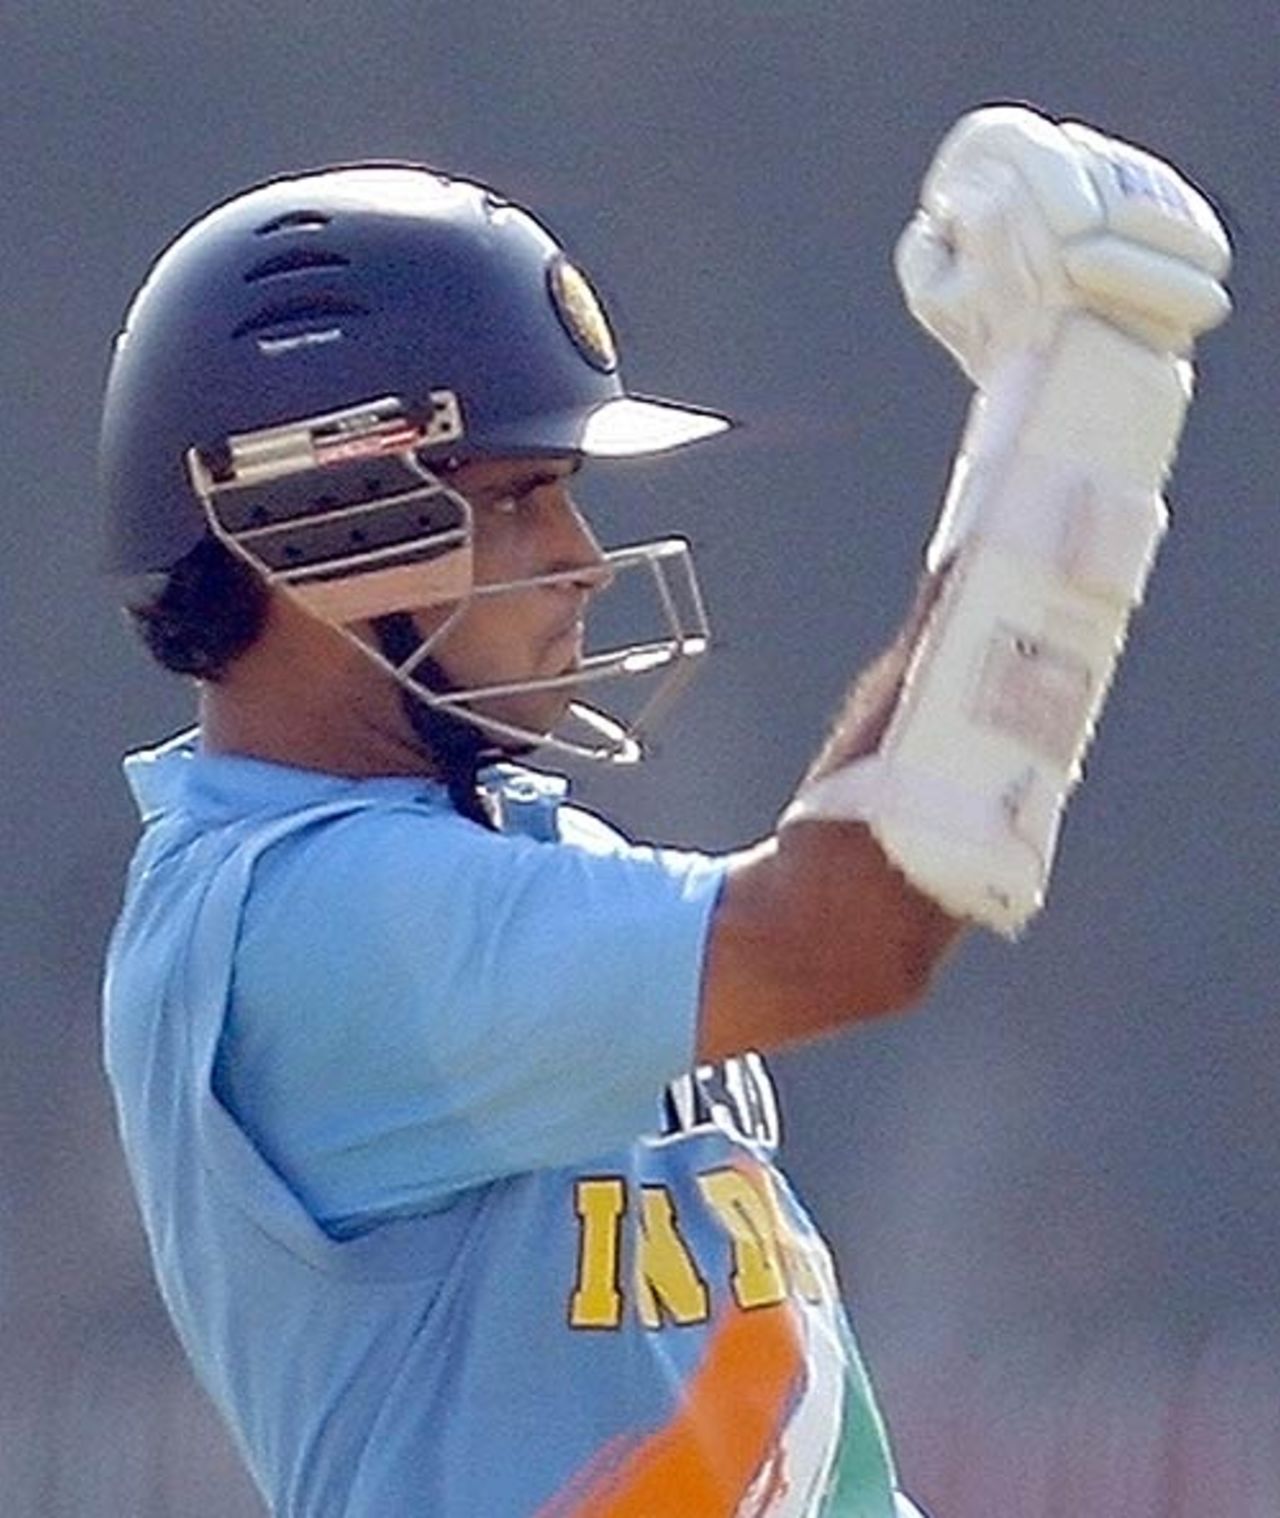 Sourav Ganguly punches the air after reaching his fifty, India v West Indies, 1st ODI, Nagpur, January 21, 2007